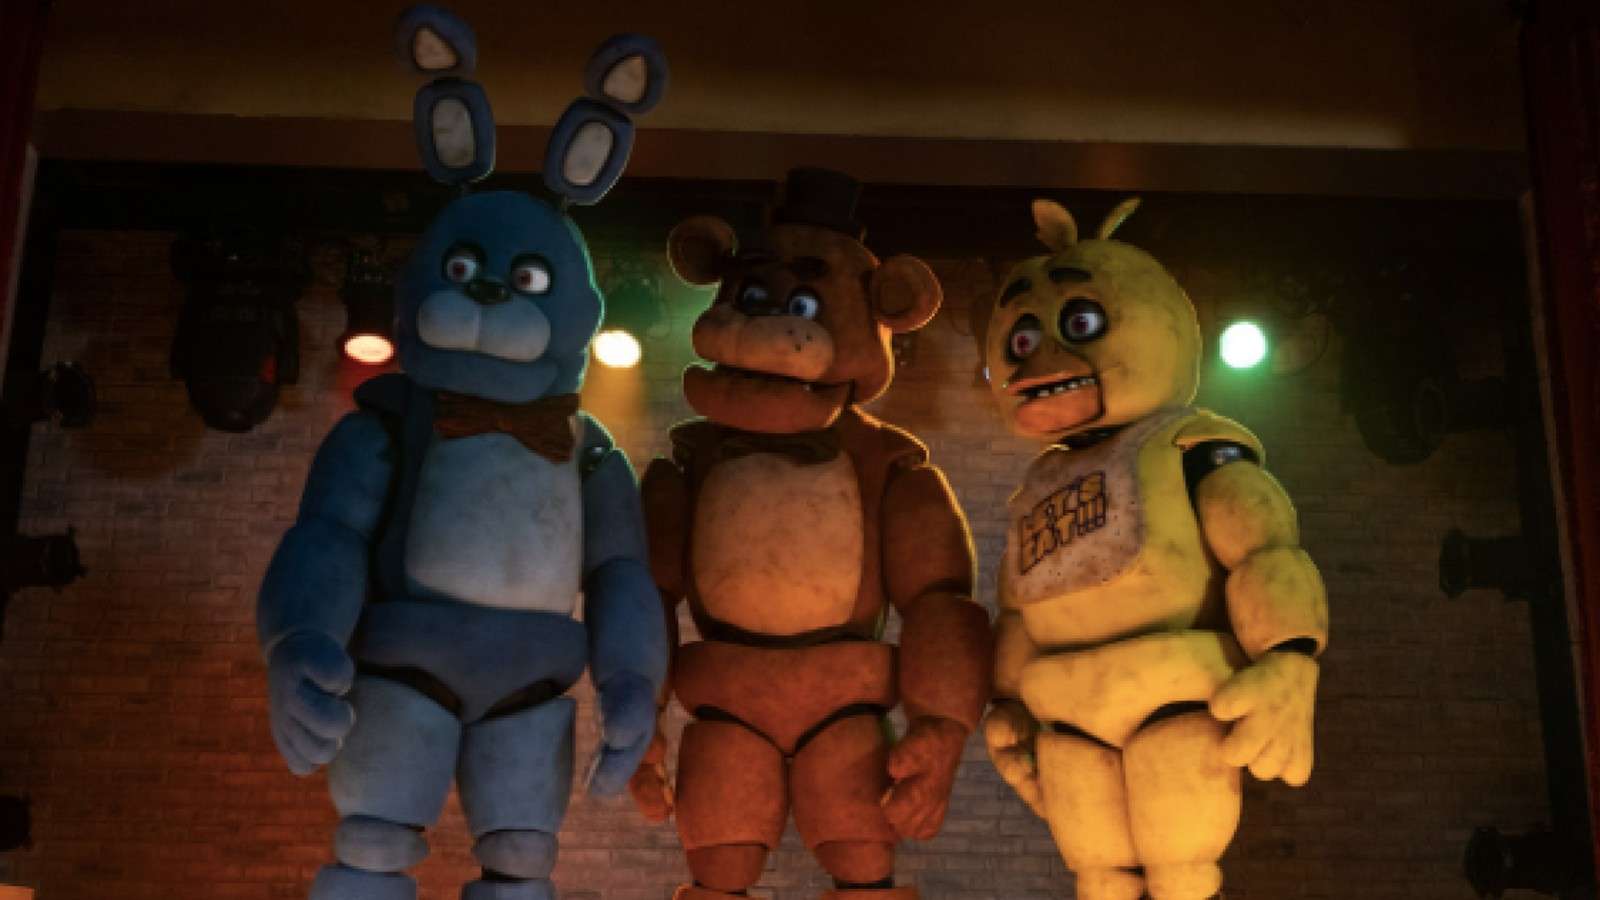 The animatronic mascots from Five Nights at Freddy's